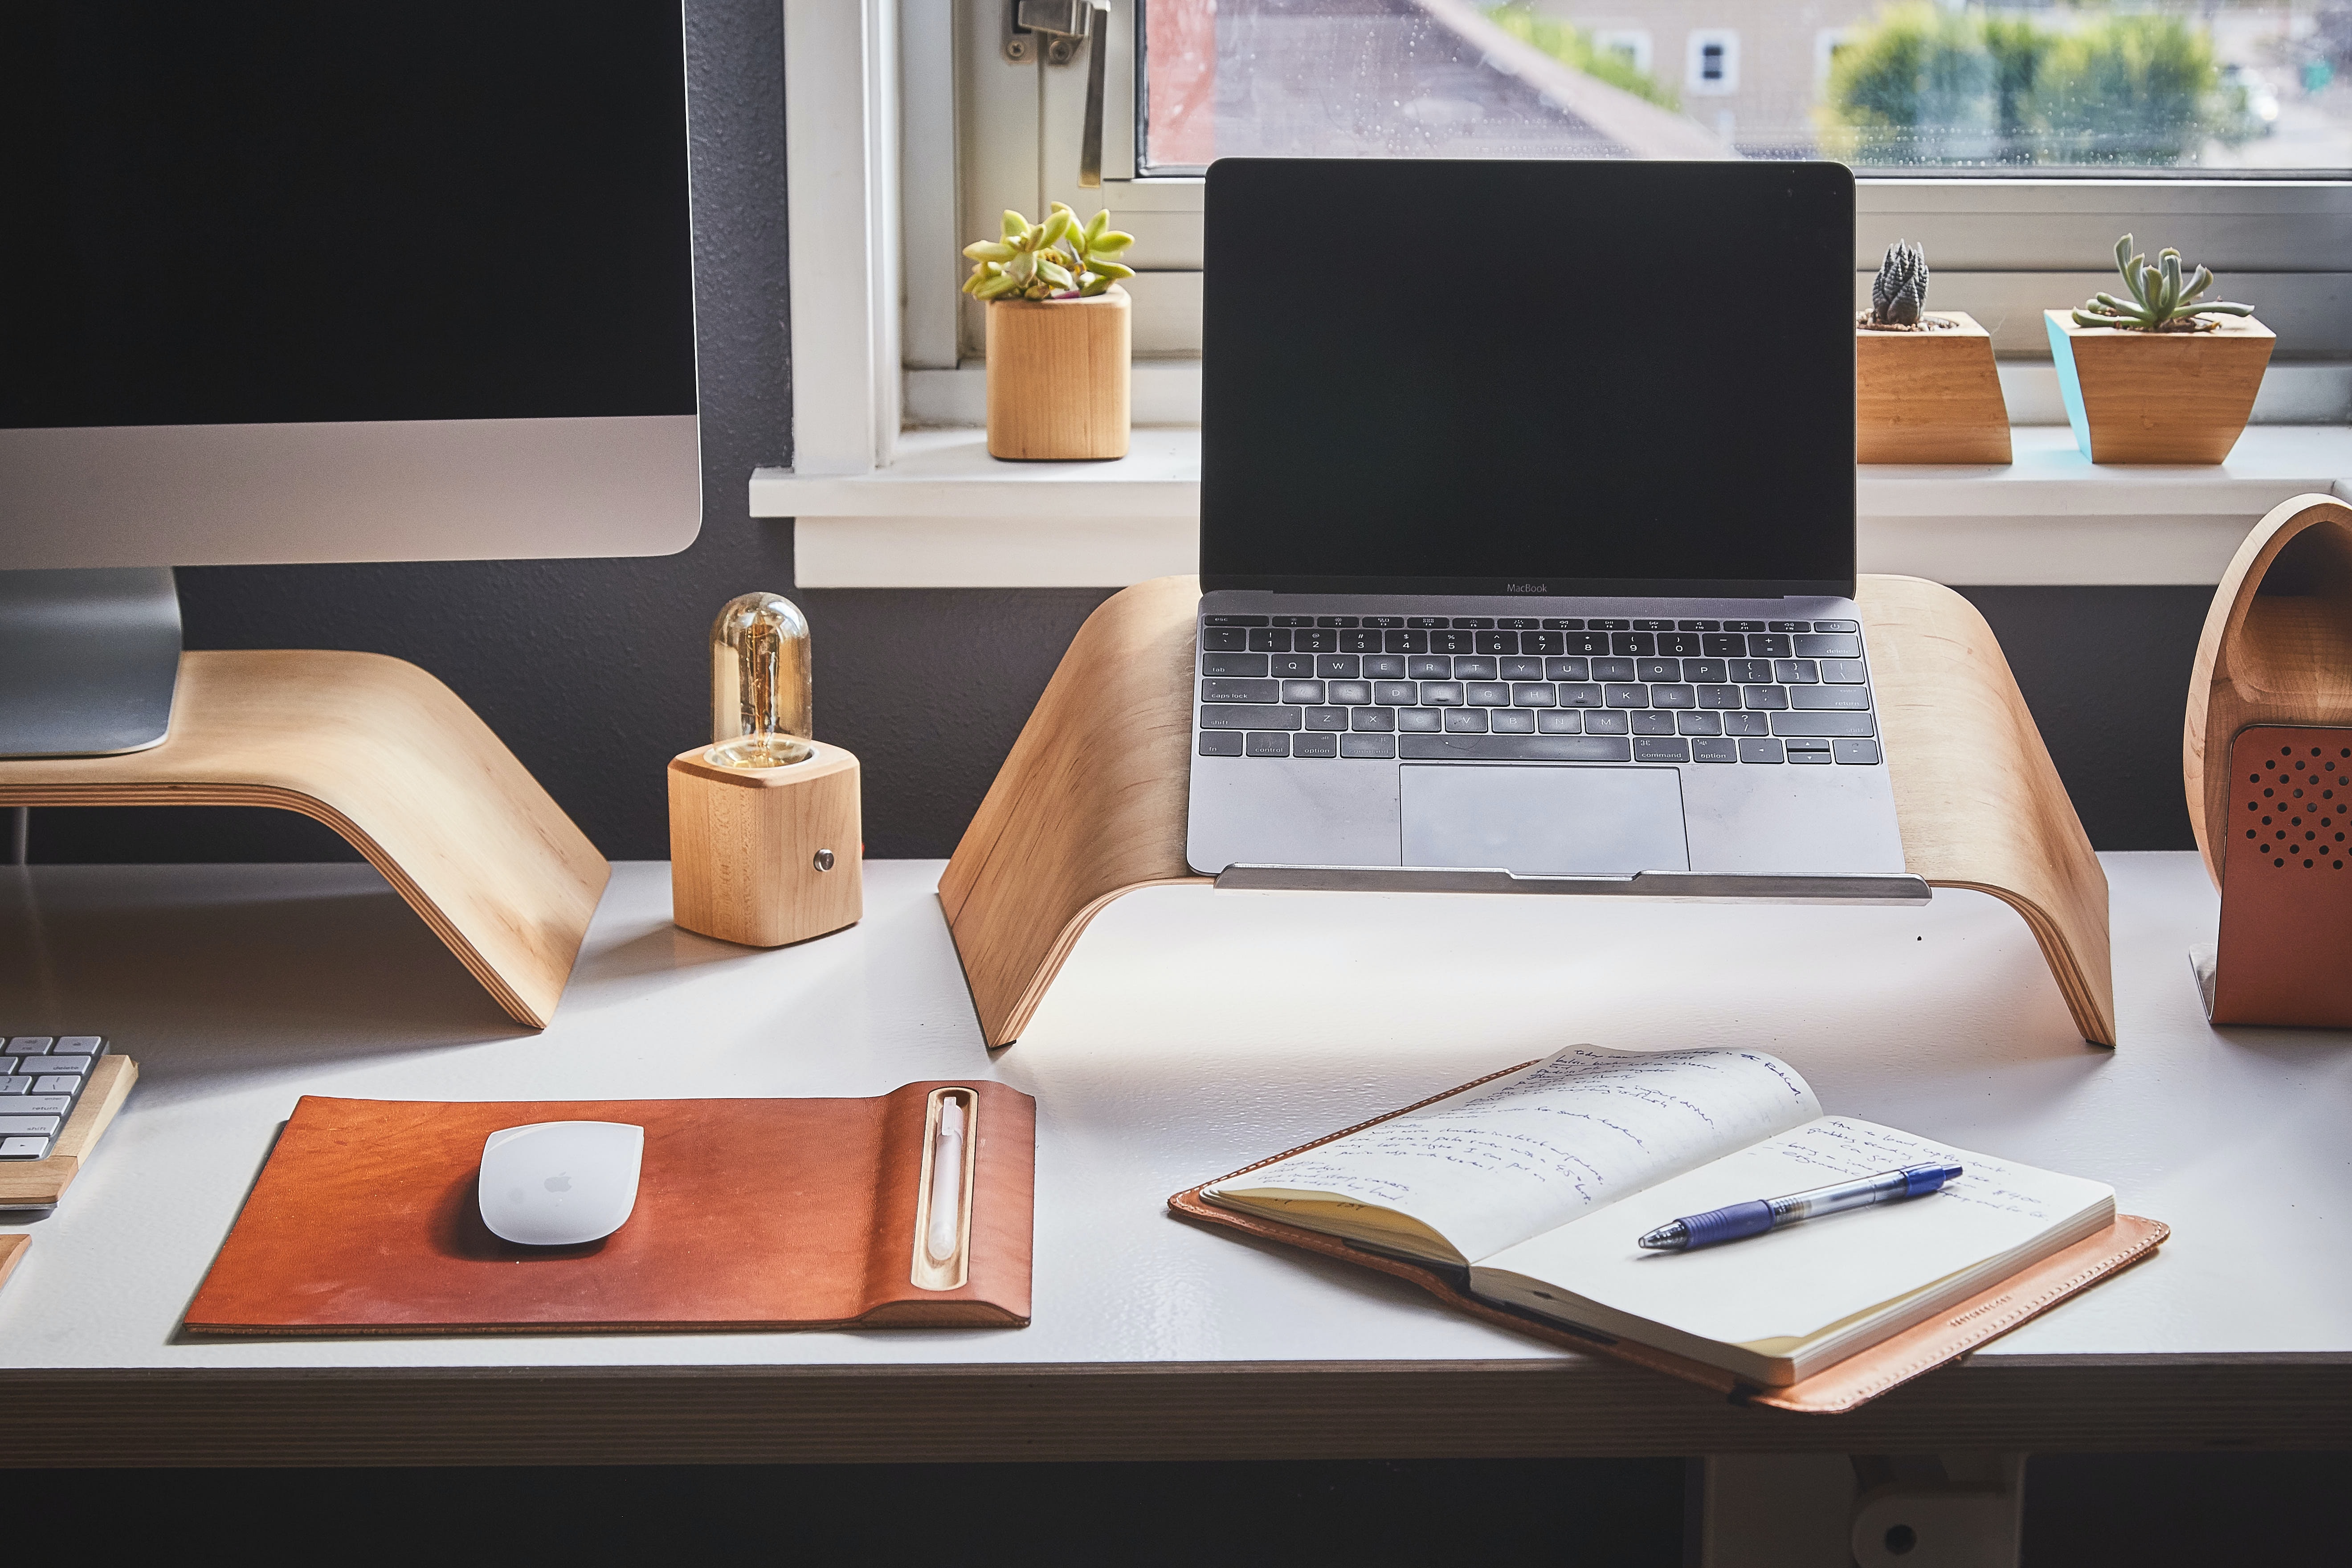 End of work in the home office: these 6 rituals help you switch off